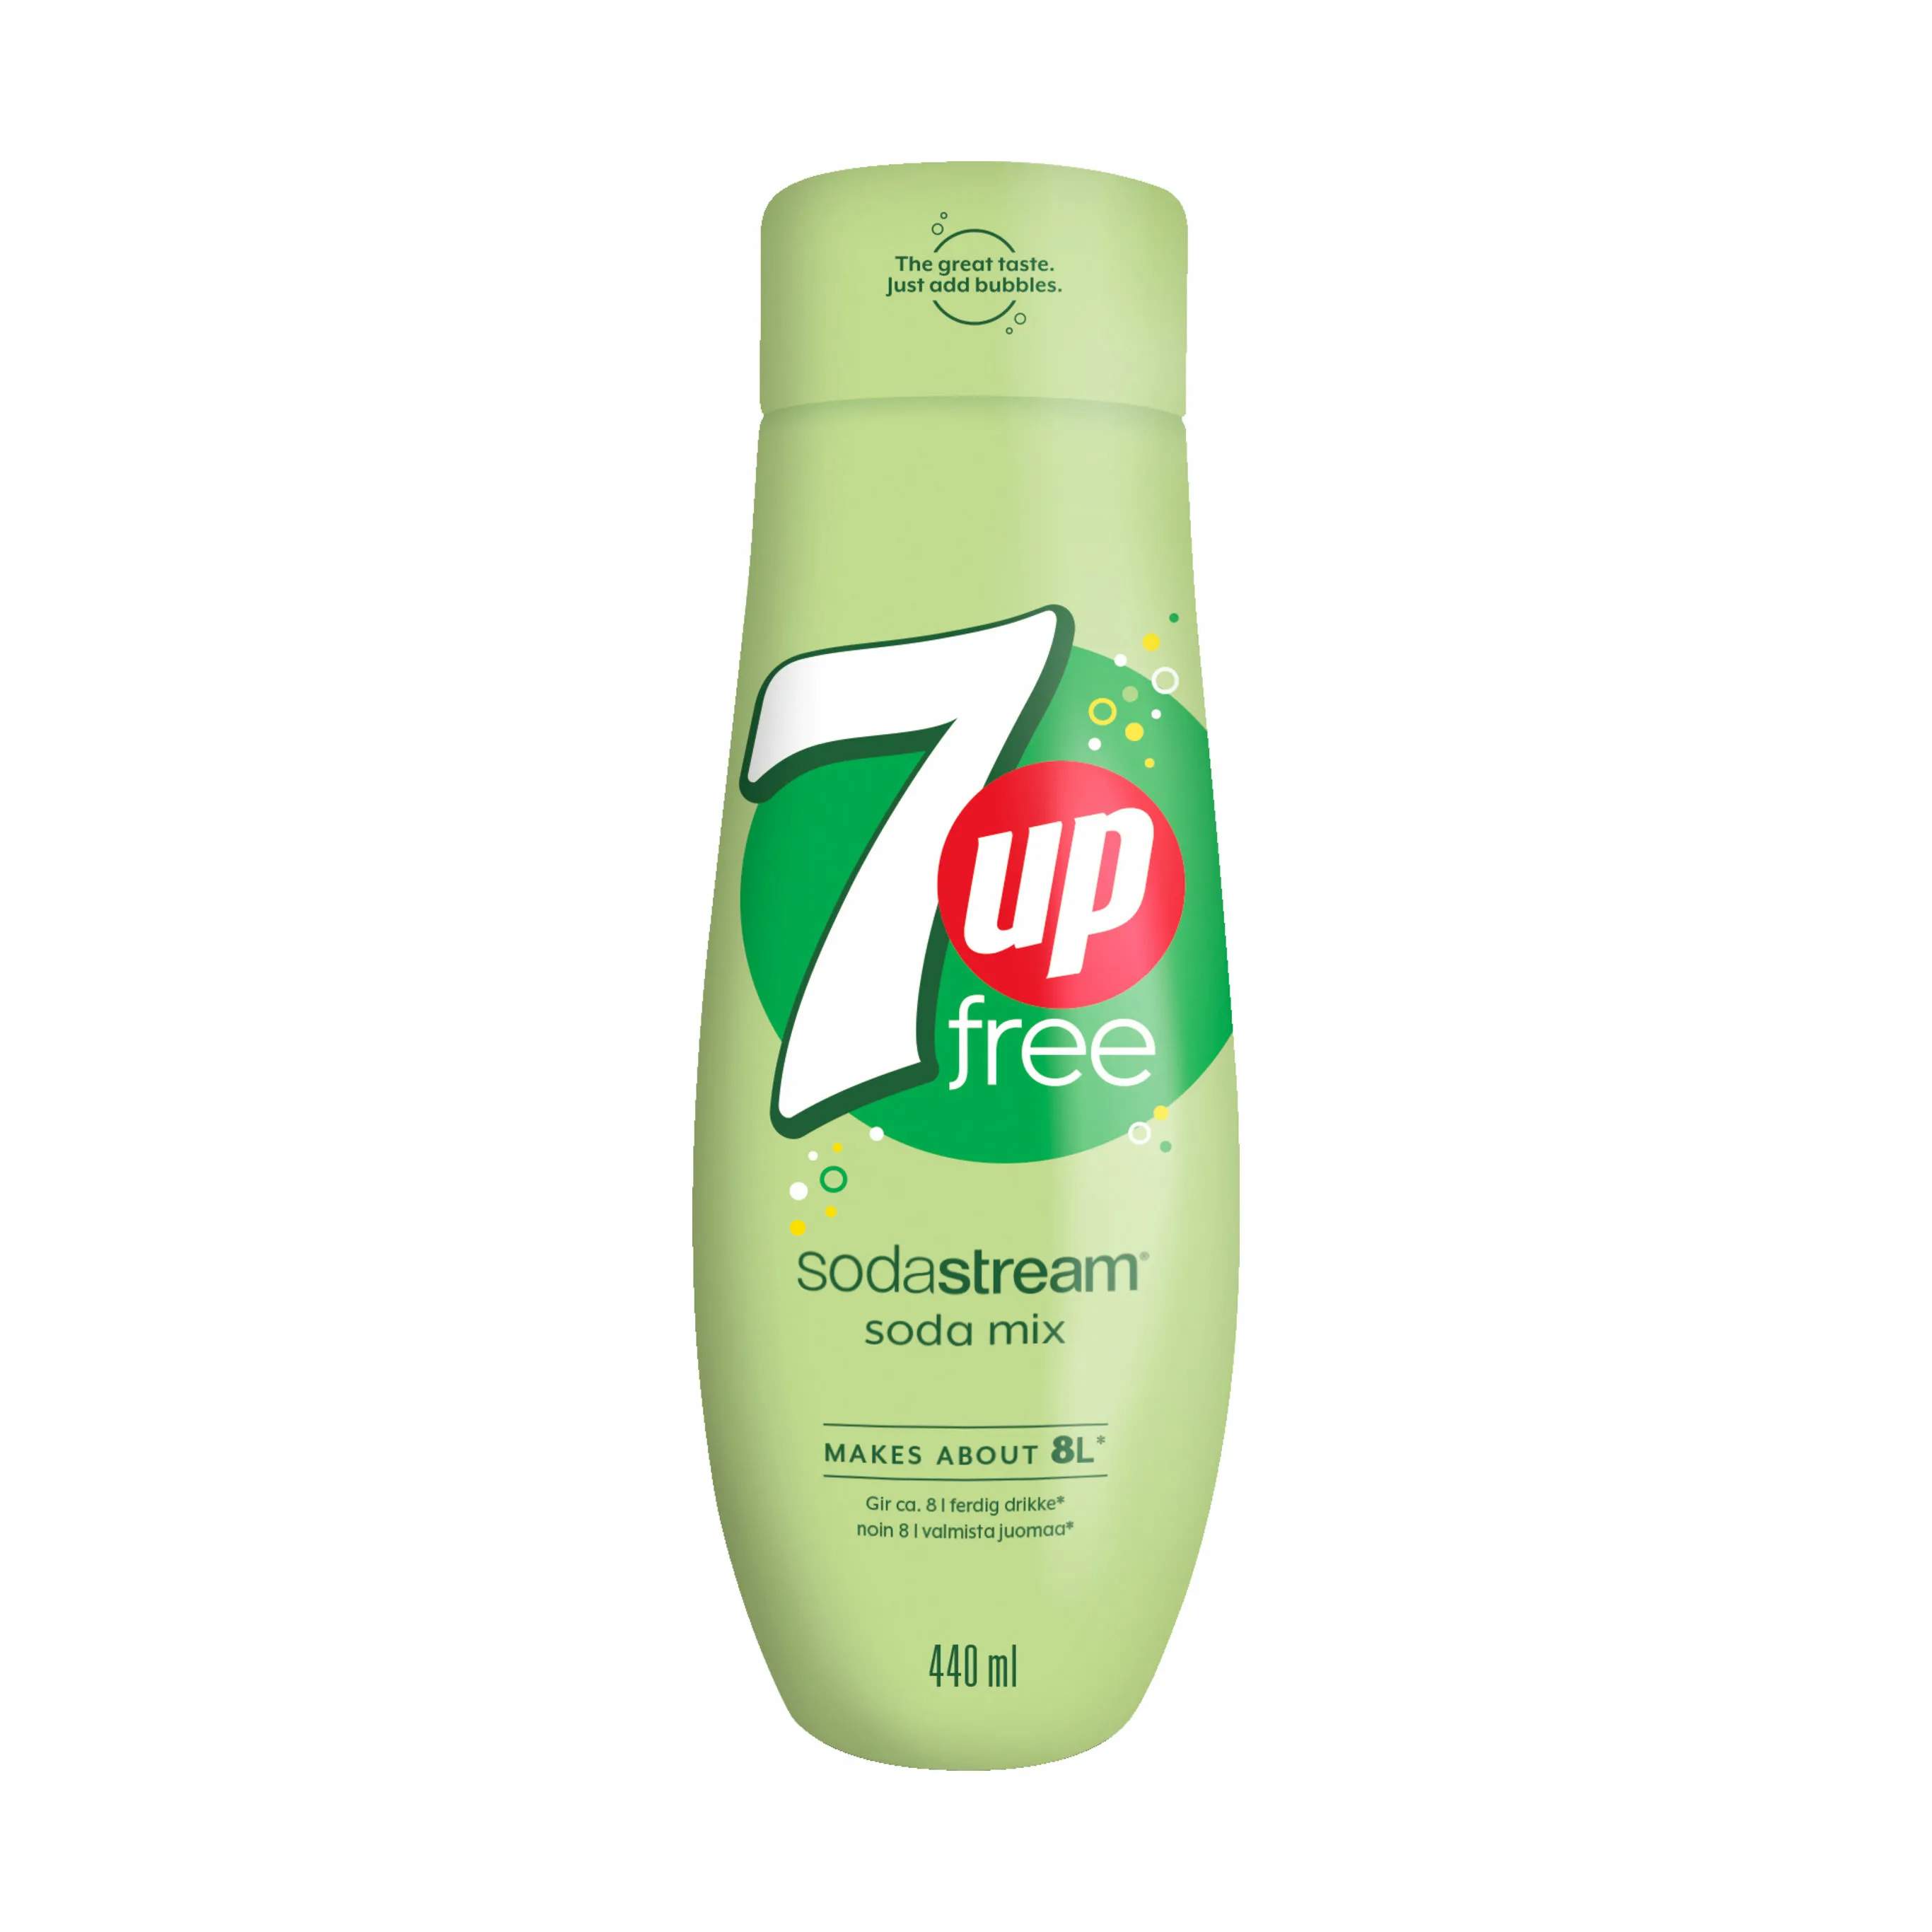 Sirup - 7up Free